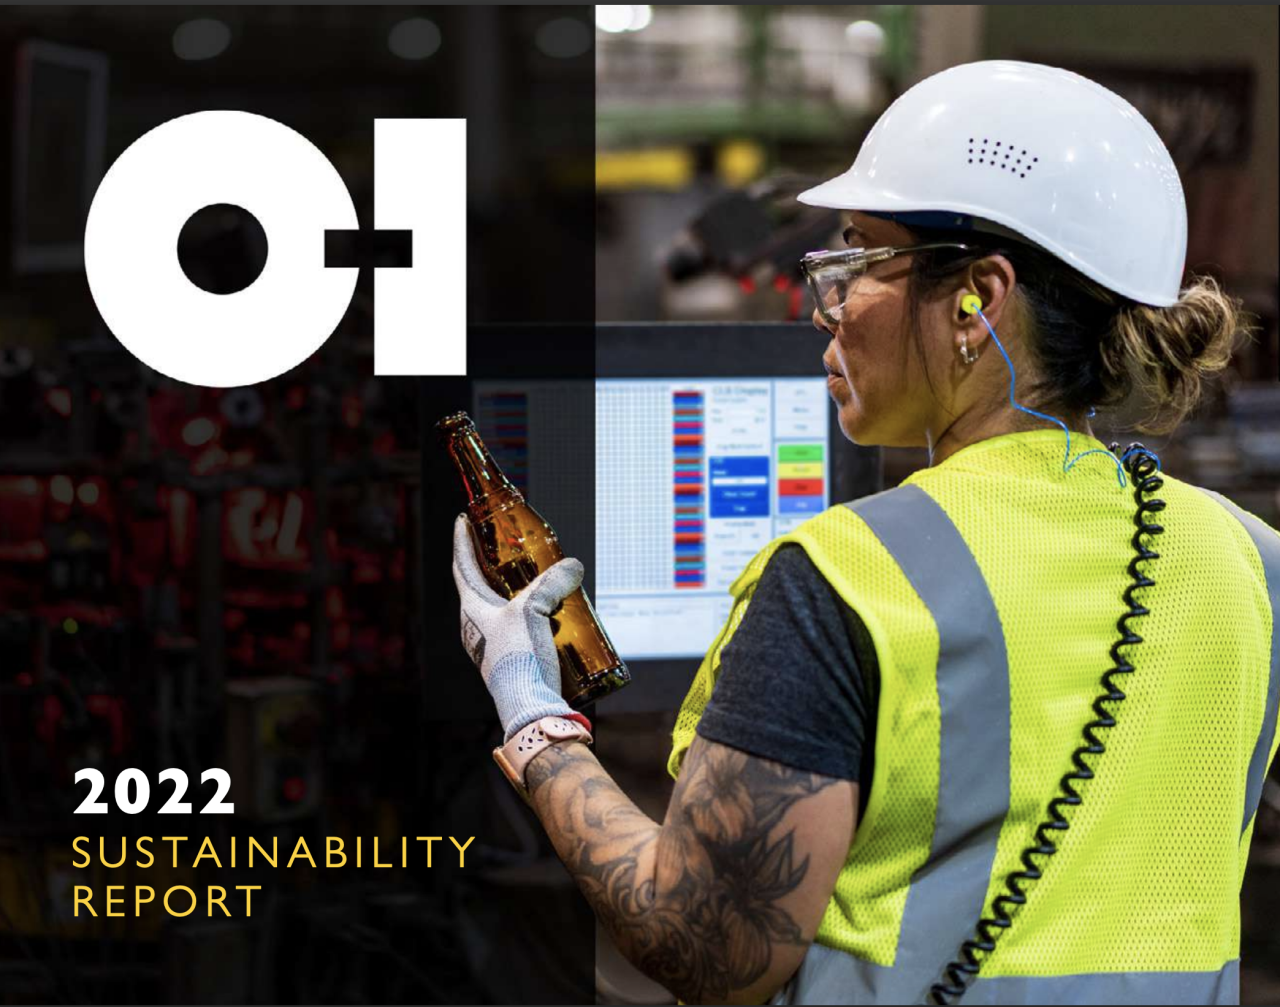 a person wearing safety gear holding a glass bottle, looking at a screen with data. OI logo and "2022 Sustainability report" on the left